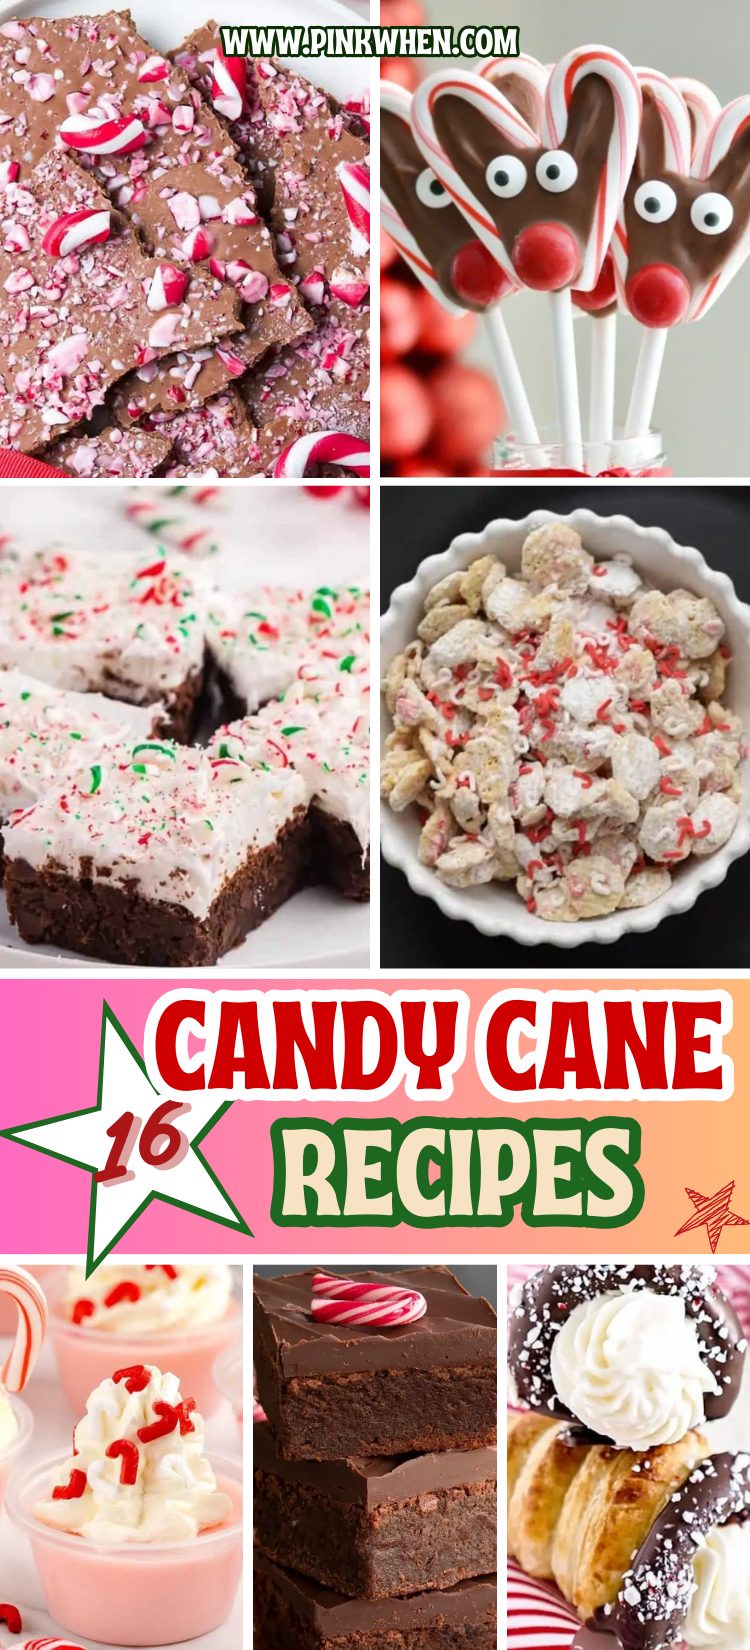 16 Candy Cane Recipes to Add More Magic to the Holidays